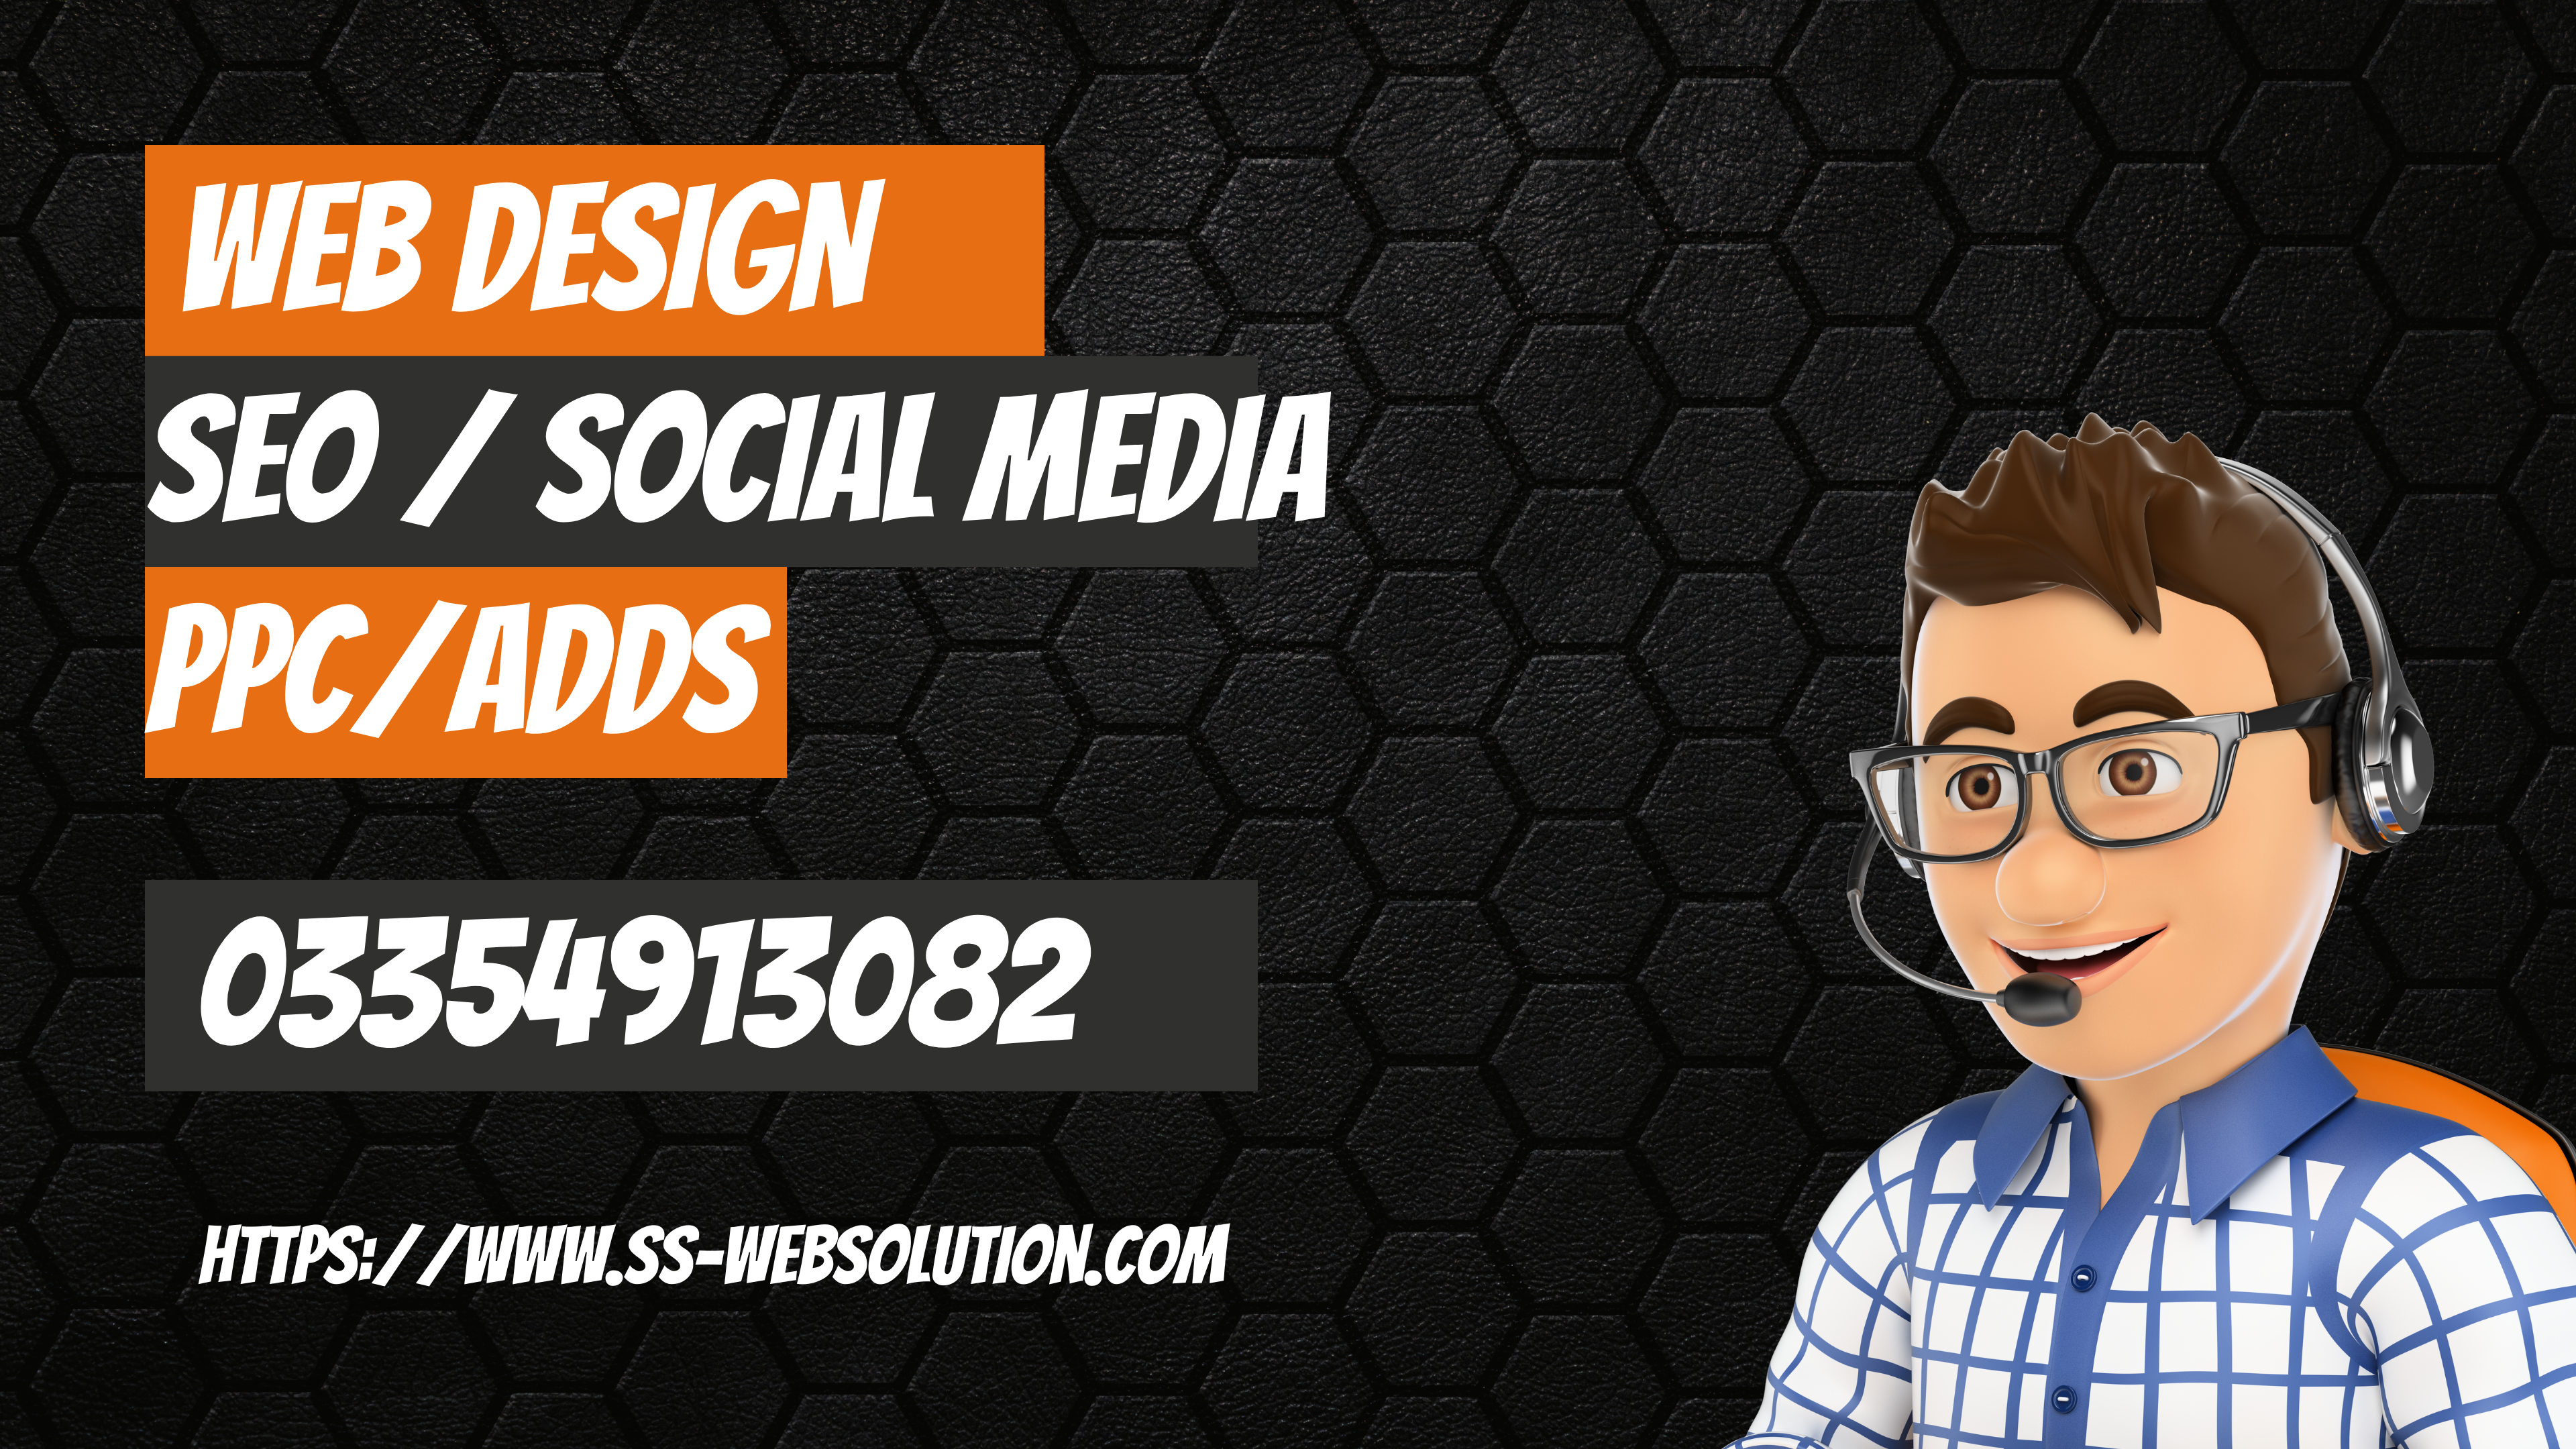 Social Media Services With Little SEO Lahore